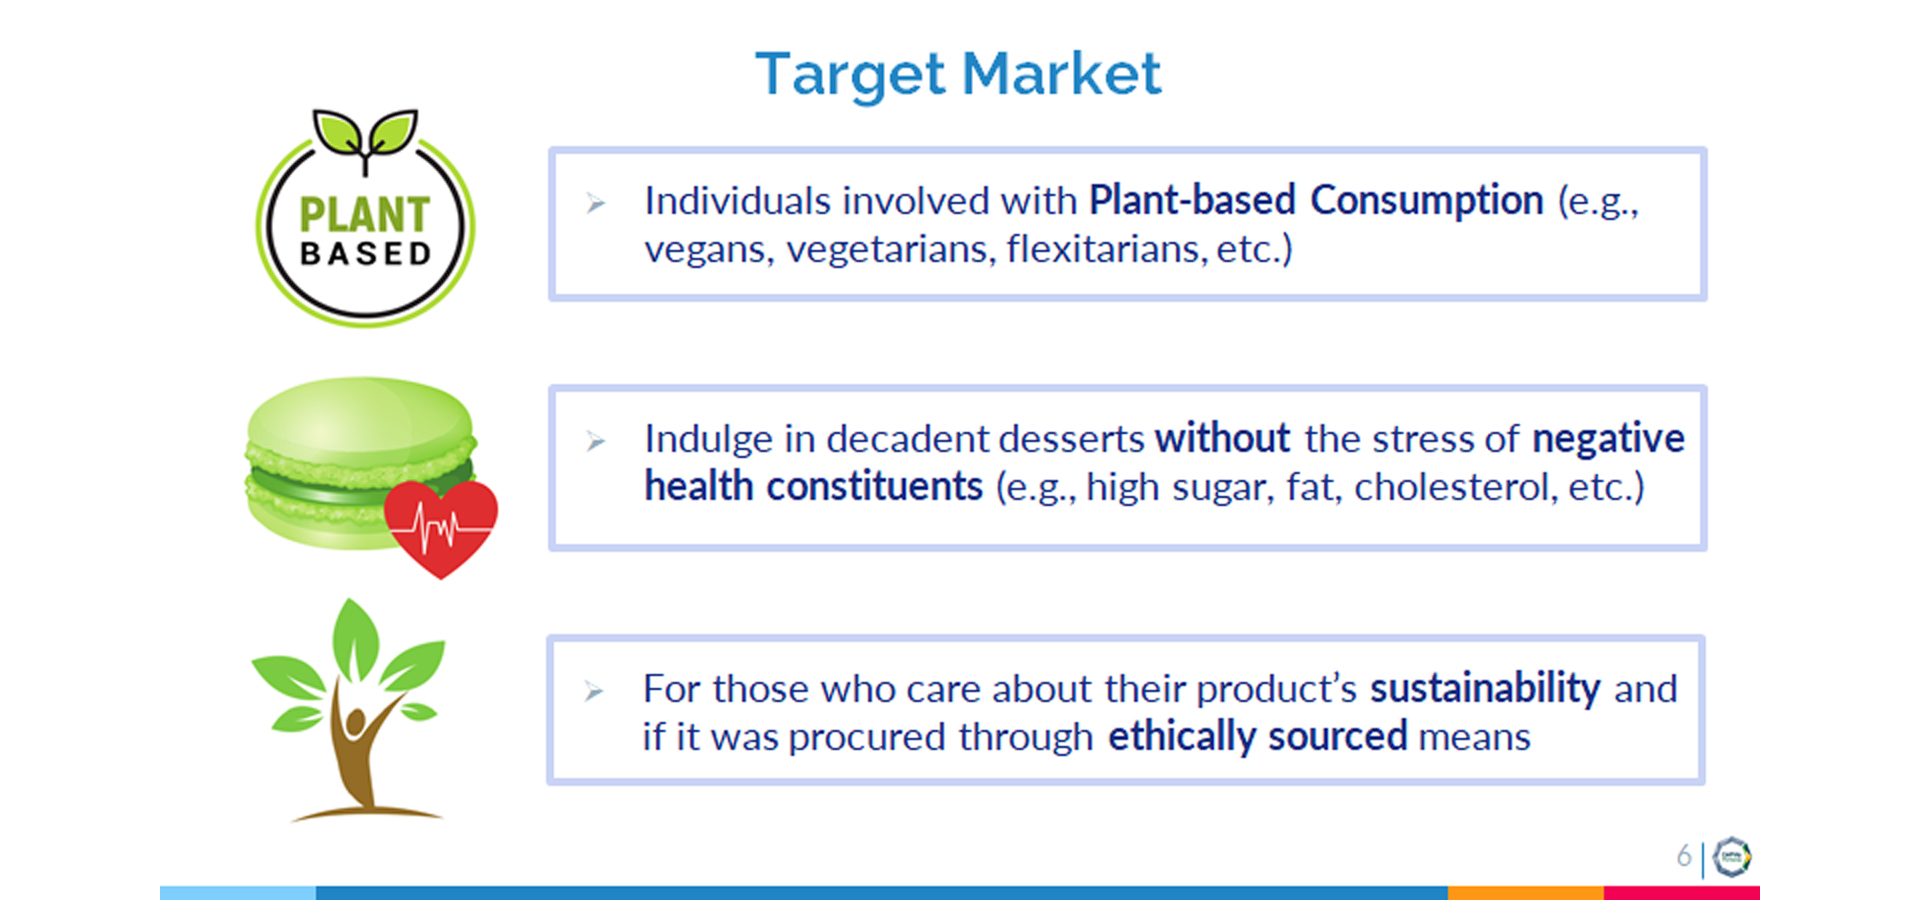 A PowerPoint slide showing the target market for the product